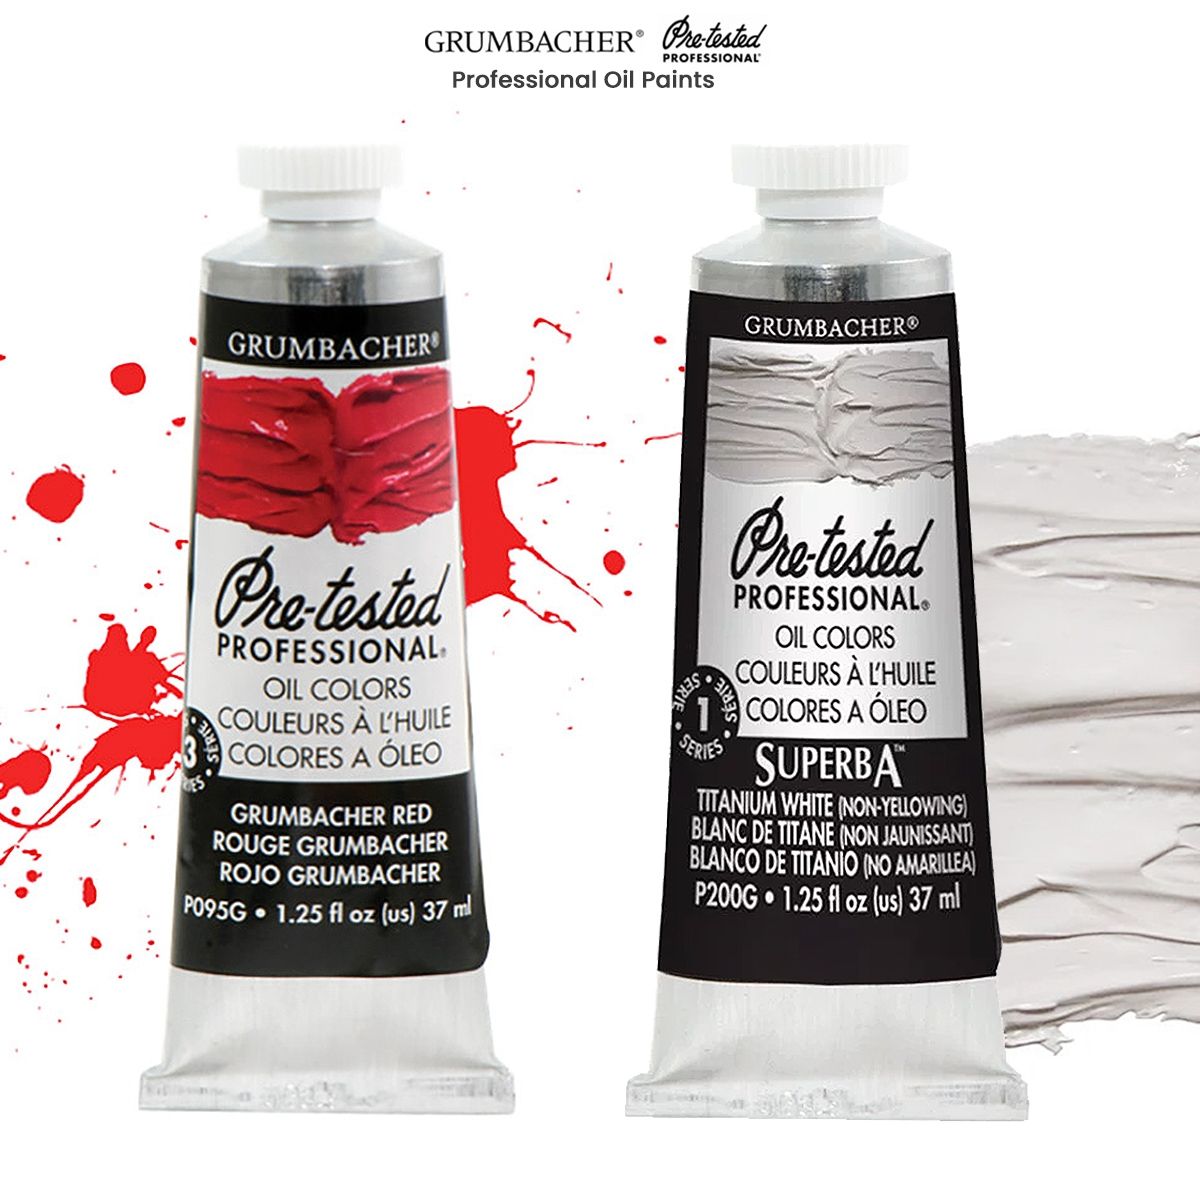 Grumbacher Pre-Tested Professional Oil Paints | Jerry's Artarama